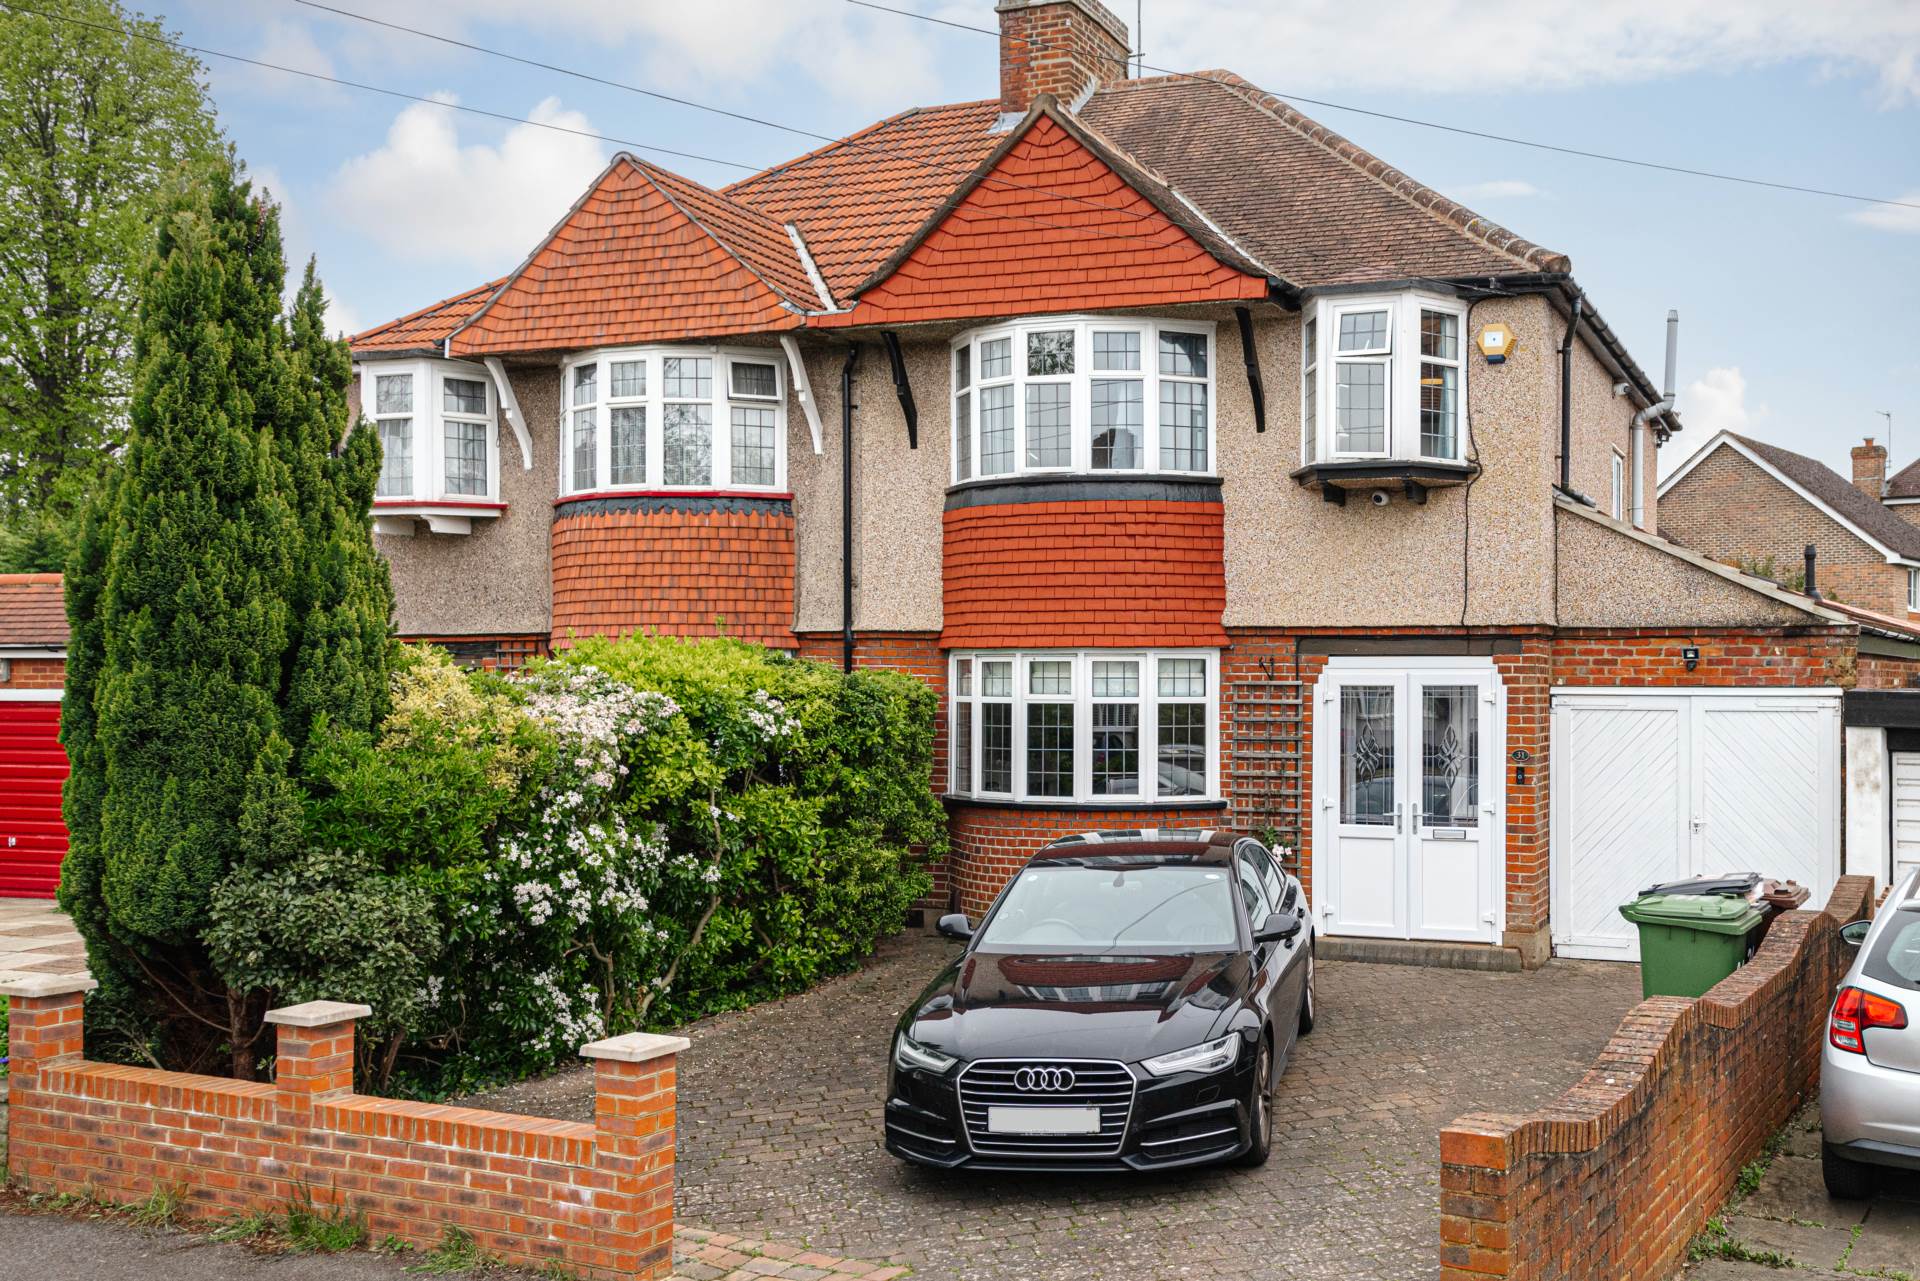 3 bed Semi-Detached House for rent in Epsom. From The Personal Agent - Epsom